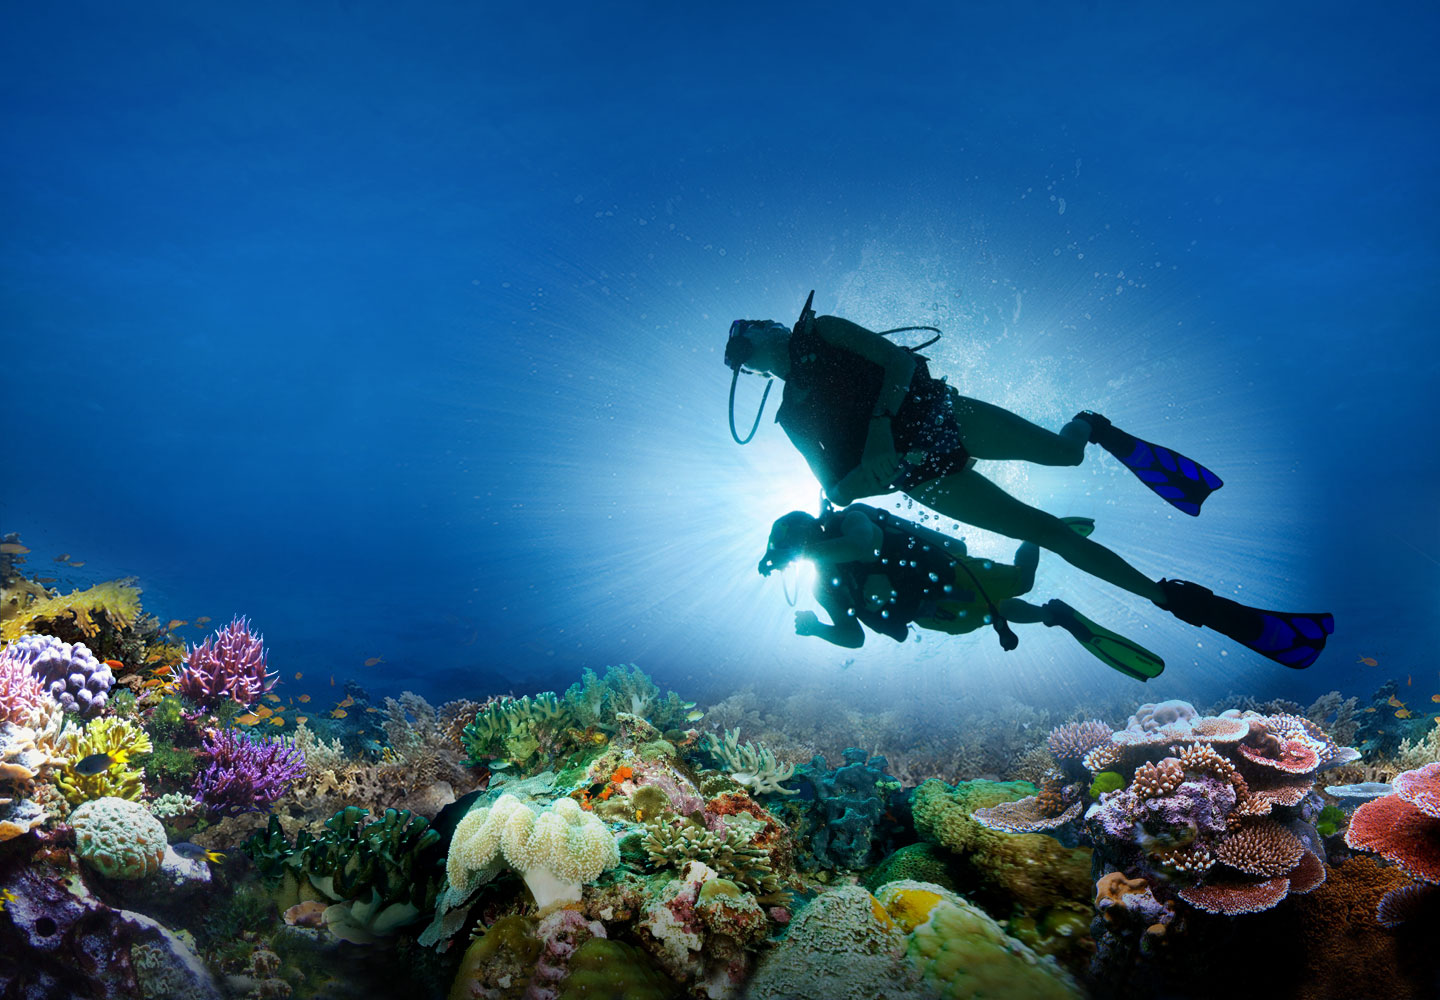 All Inclusive Scuba The Best Scuba Diving Vacations Are At Sandals Resorts In The Caribbean